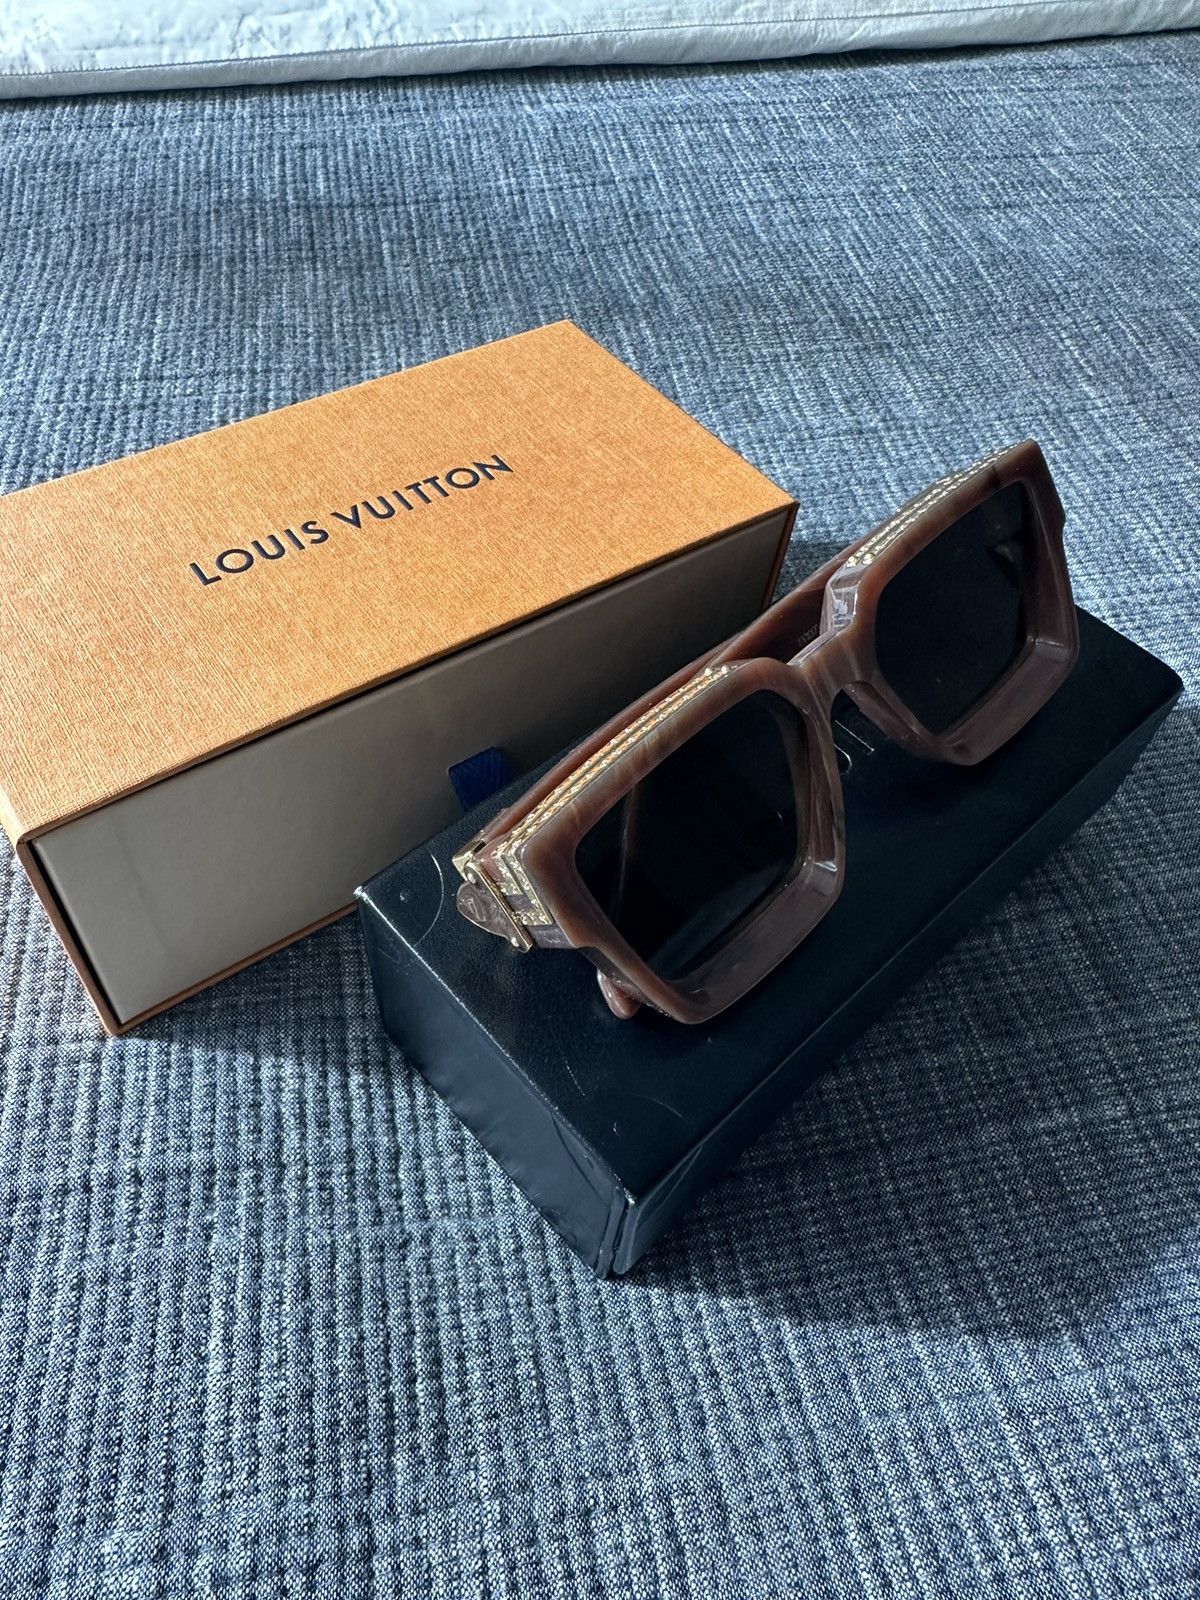 Check out the Louis Vuitton 1.1 Millionaires Sunglasses Black/Blue  available on StockX